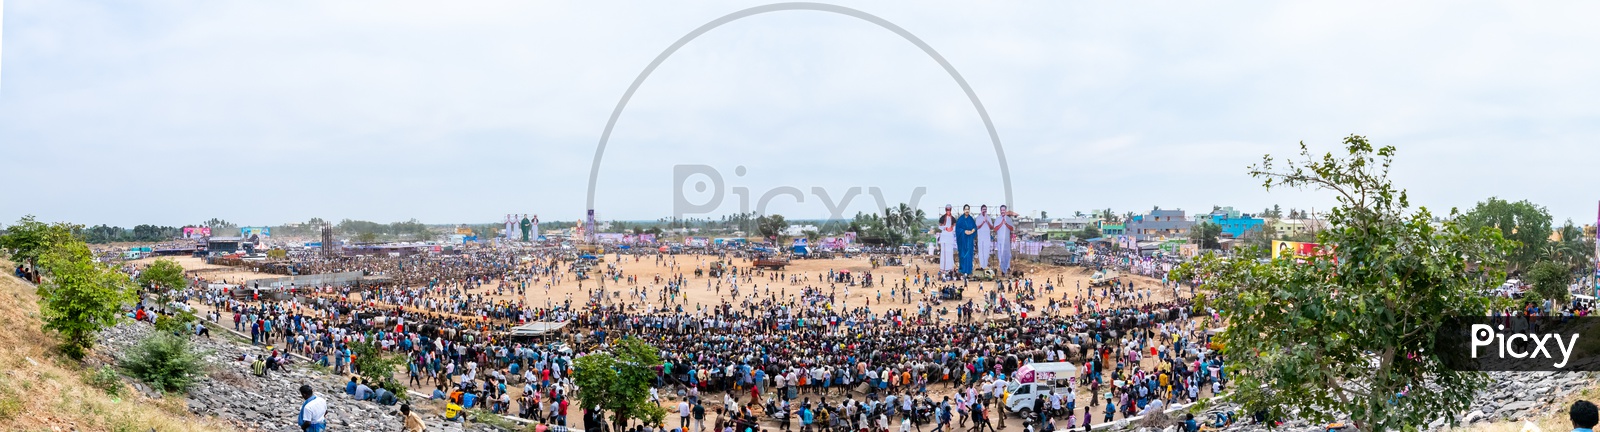 Panoramic View Of Crowd At a Political Part Meeting In Tamilnadu